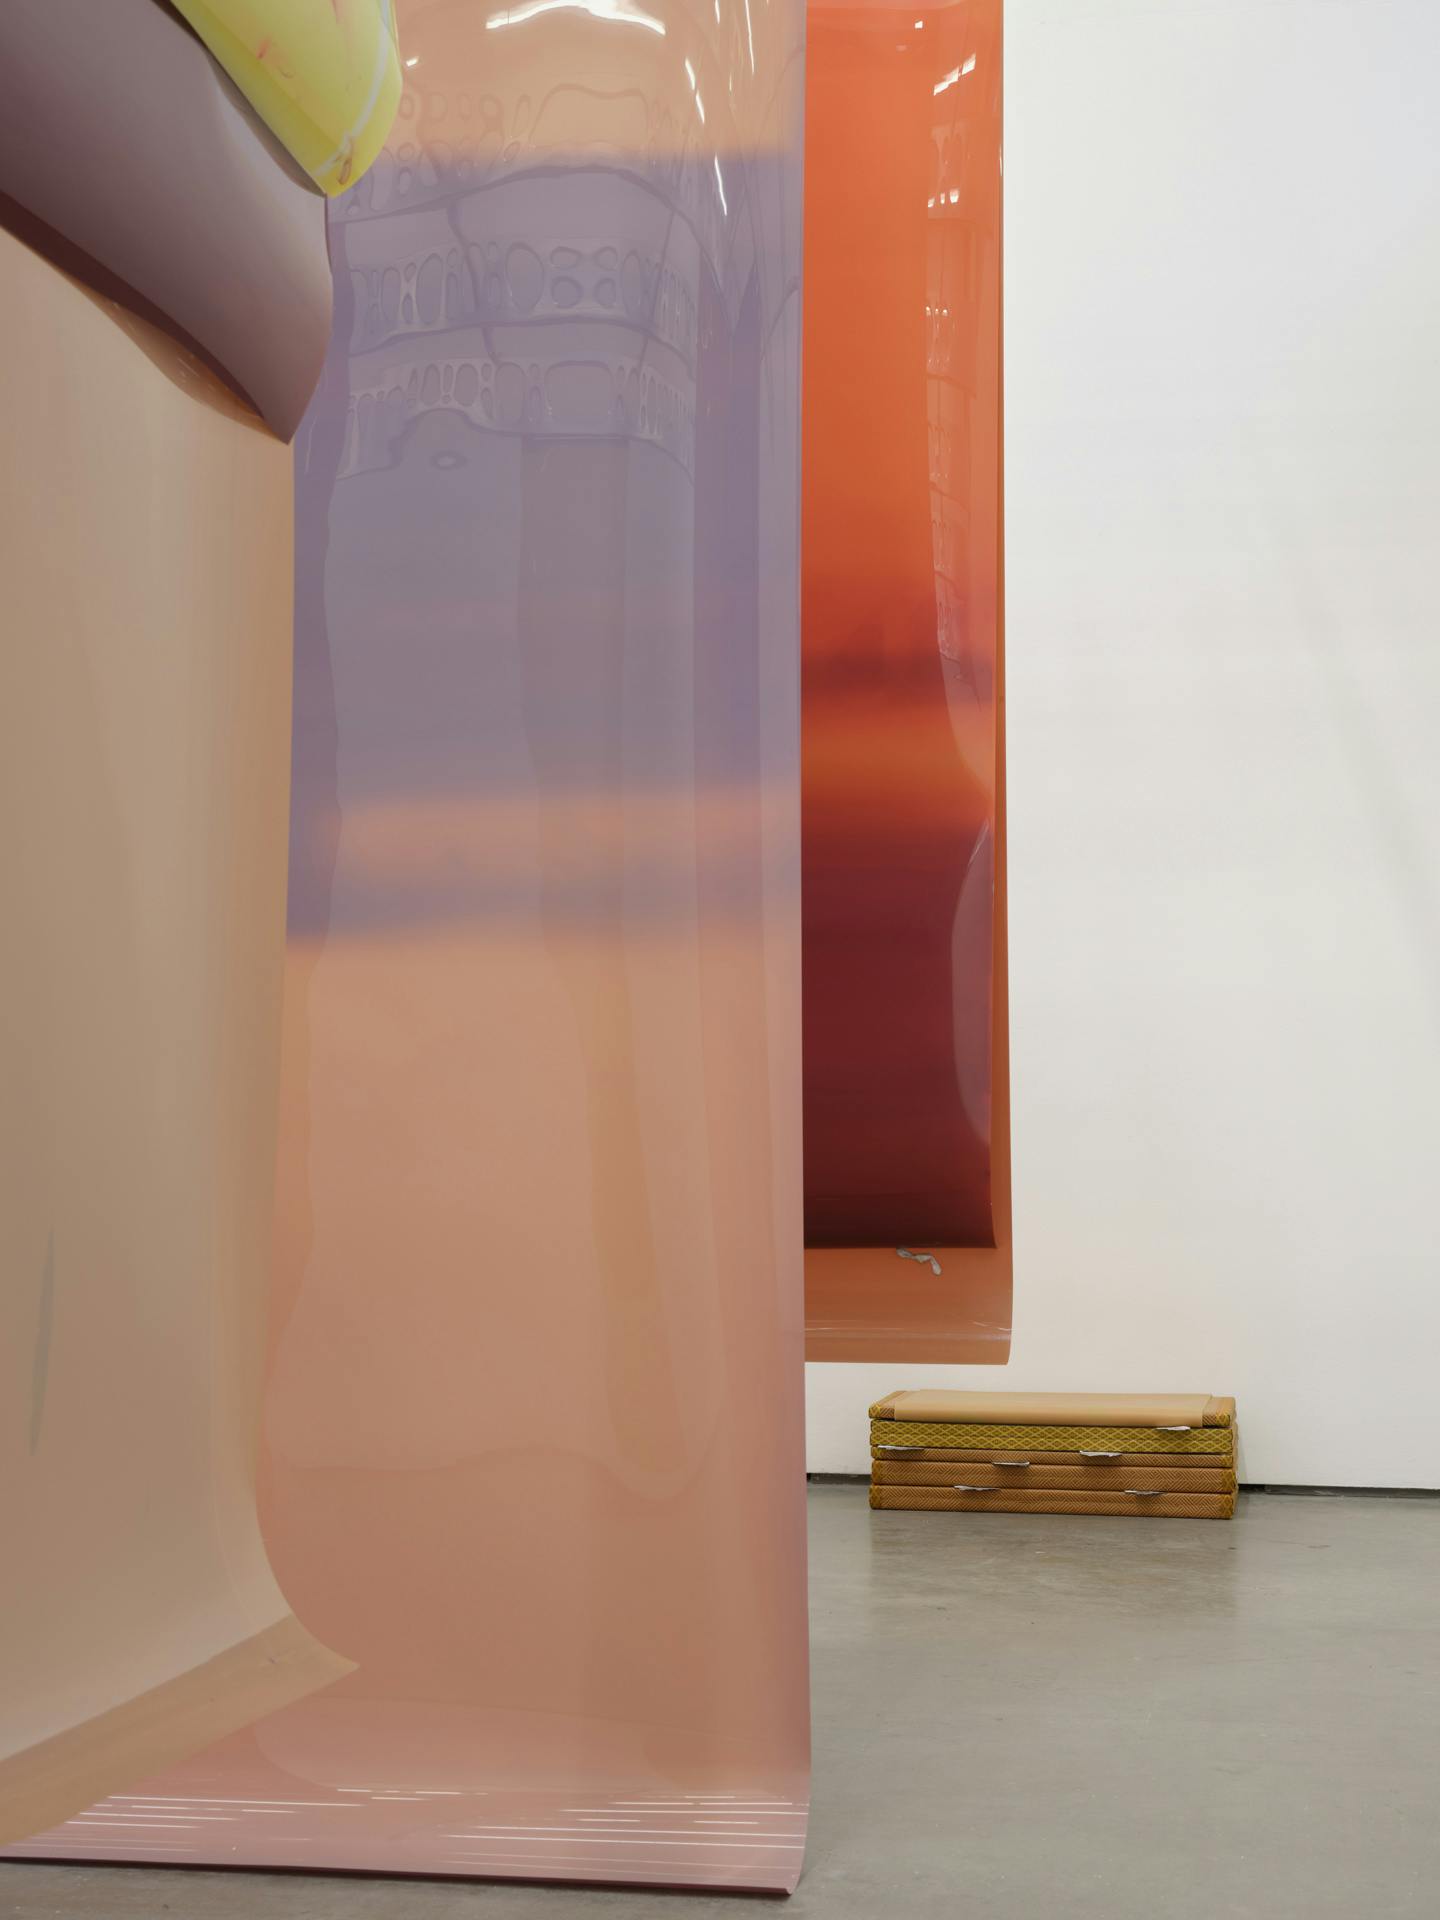 Long earth tone sheets of film of various colours are suspended from the ceiling. A sculpture, made of tatami mats and cast aluminium objects, sits against a white wall in the background.⁠